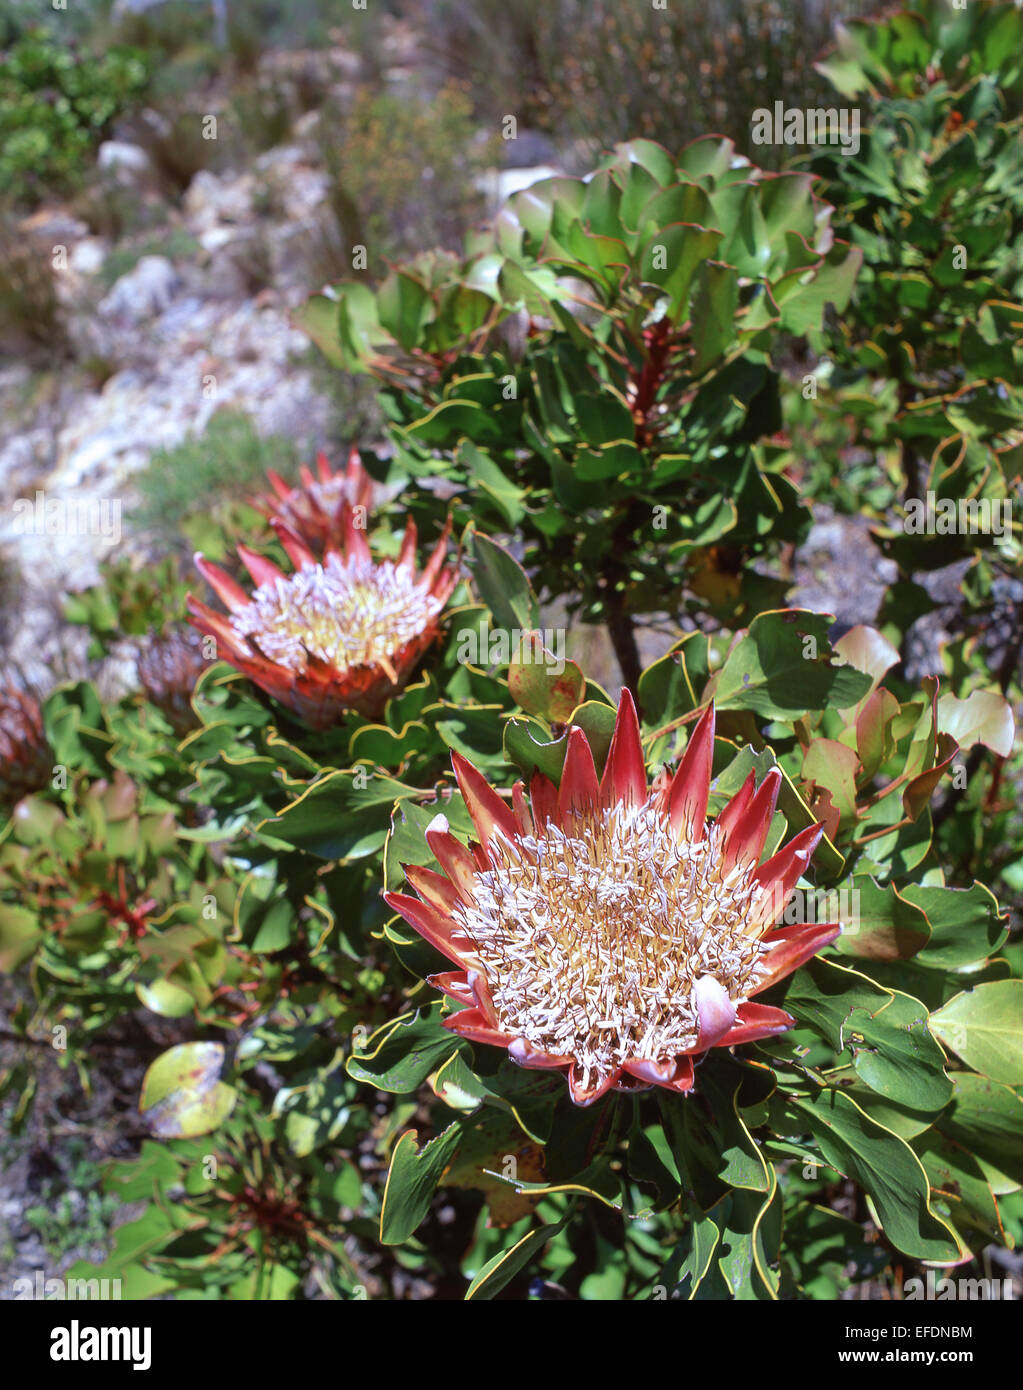 King Protea (Protea cynaroides) flower, Kirstenbosch Gardens, Cape Town, Western Cape Province, Republic of South Africa Stock Photo